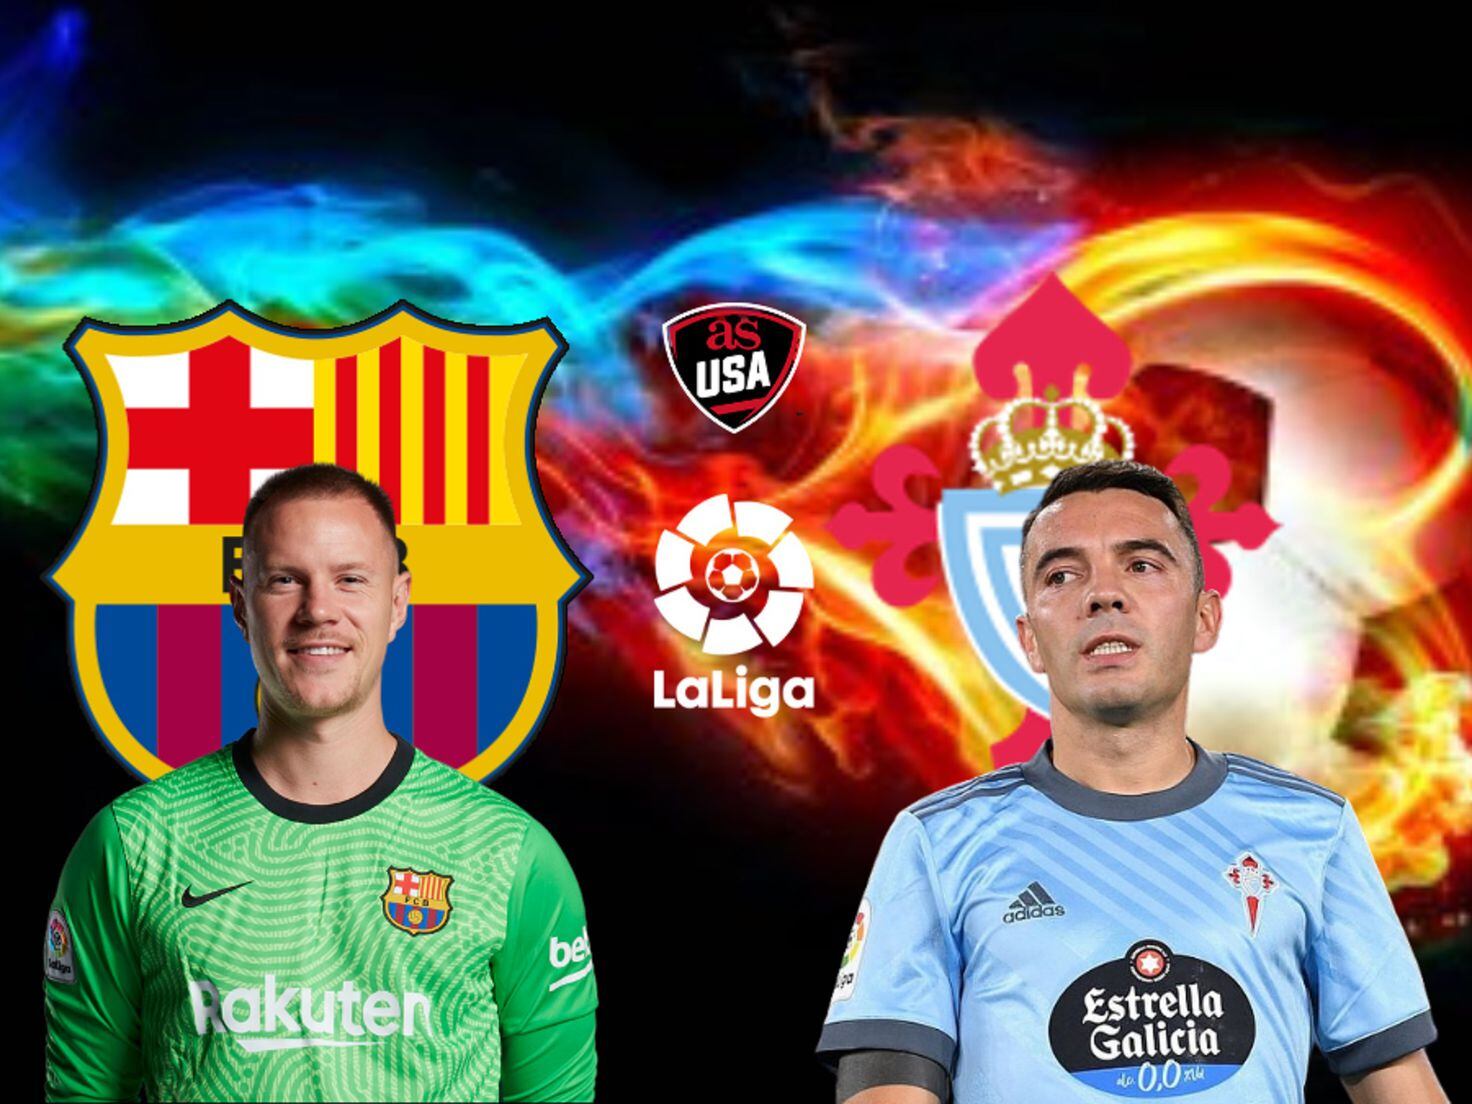 How to Watch LaLiga Streaming Live in the US Today - December 16